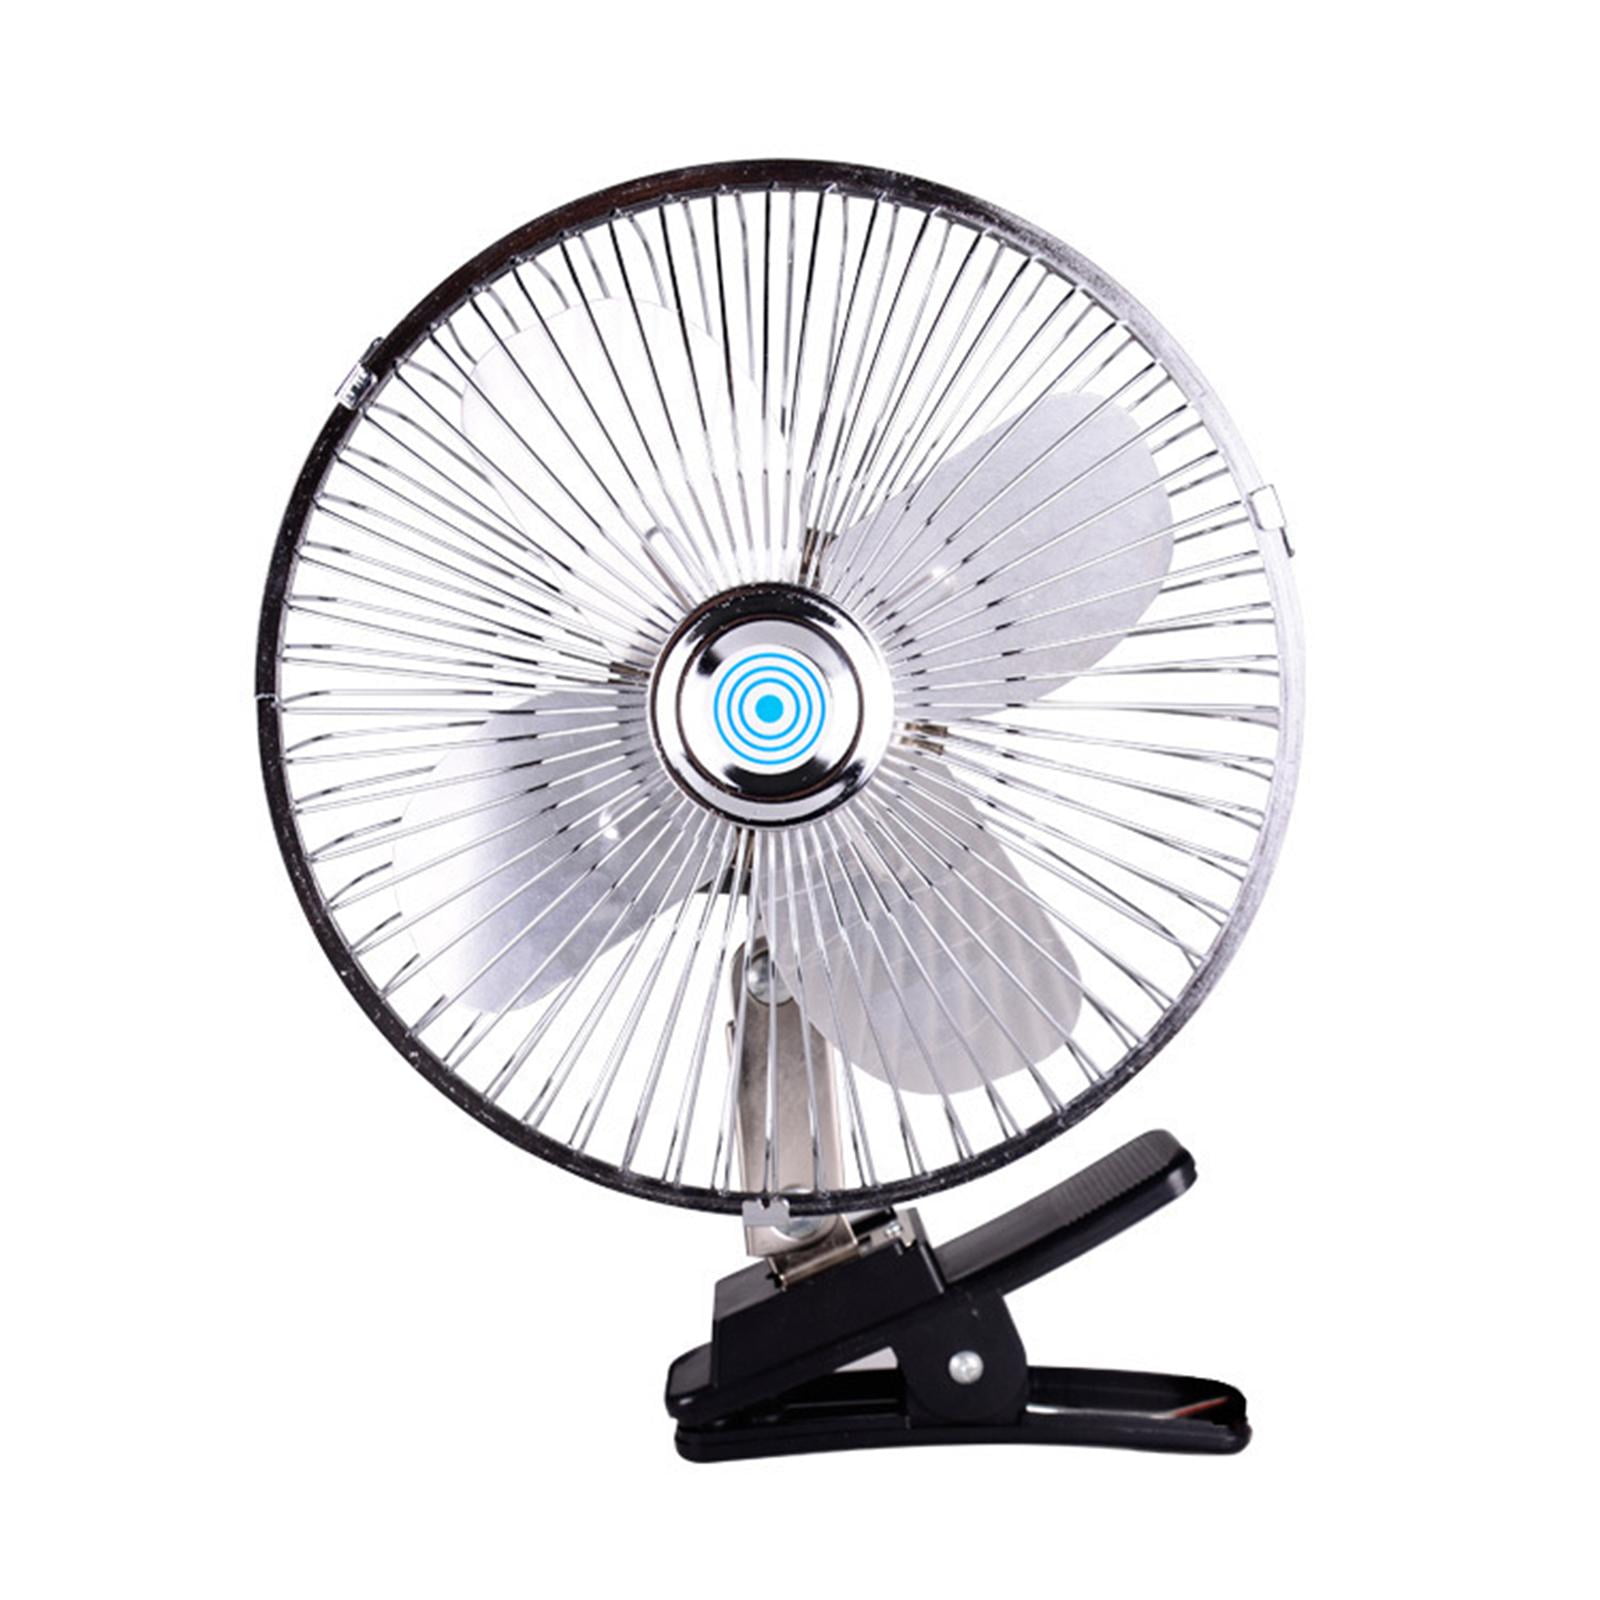 8 Inch 12V Portable Car Electric Fan 2 Speeds Adjustable Oscillating Car  Auto Cooling Fan with Clip Low Noise for Vehicle Truck